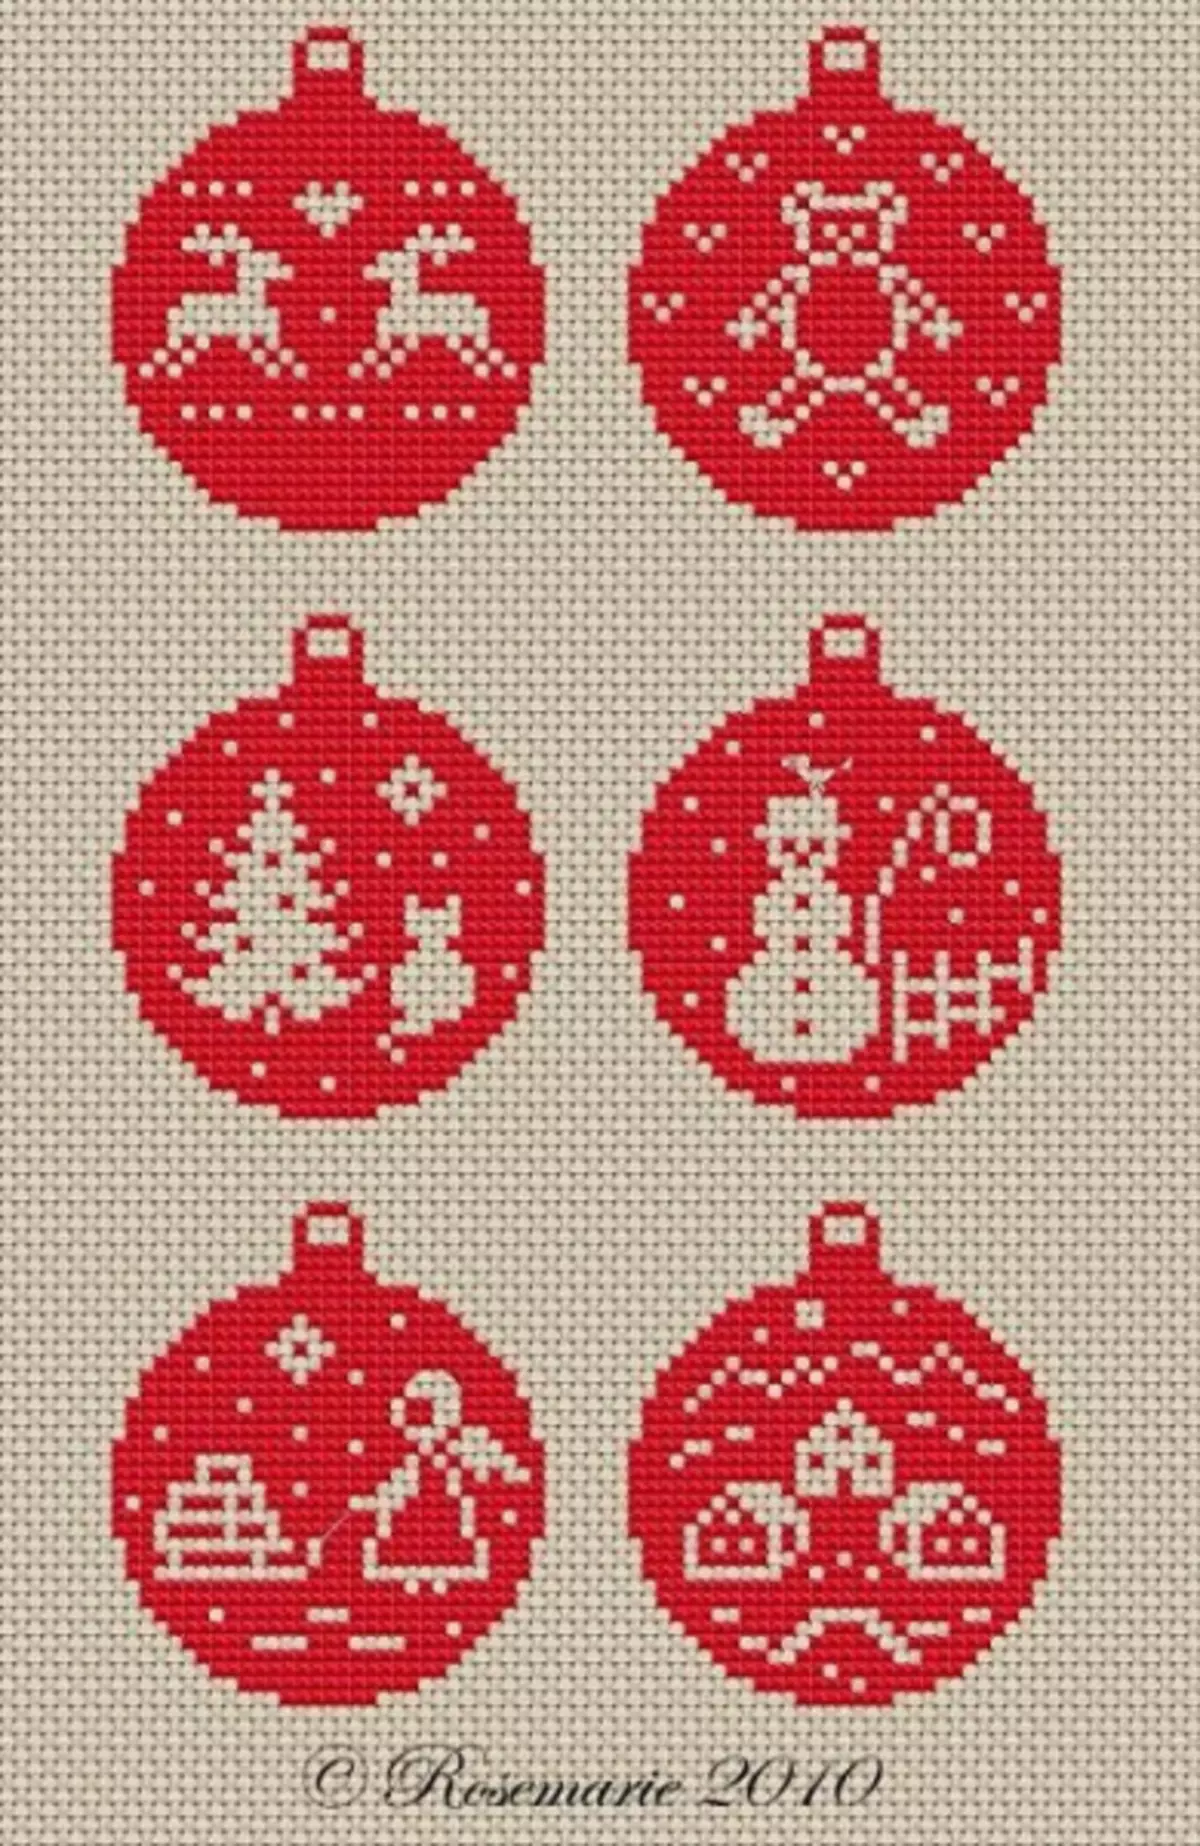 Embroidery Christmas toys with a cross - embroidery scheme for the new year